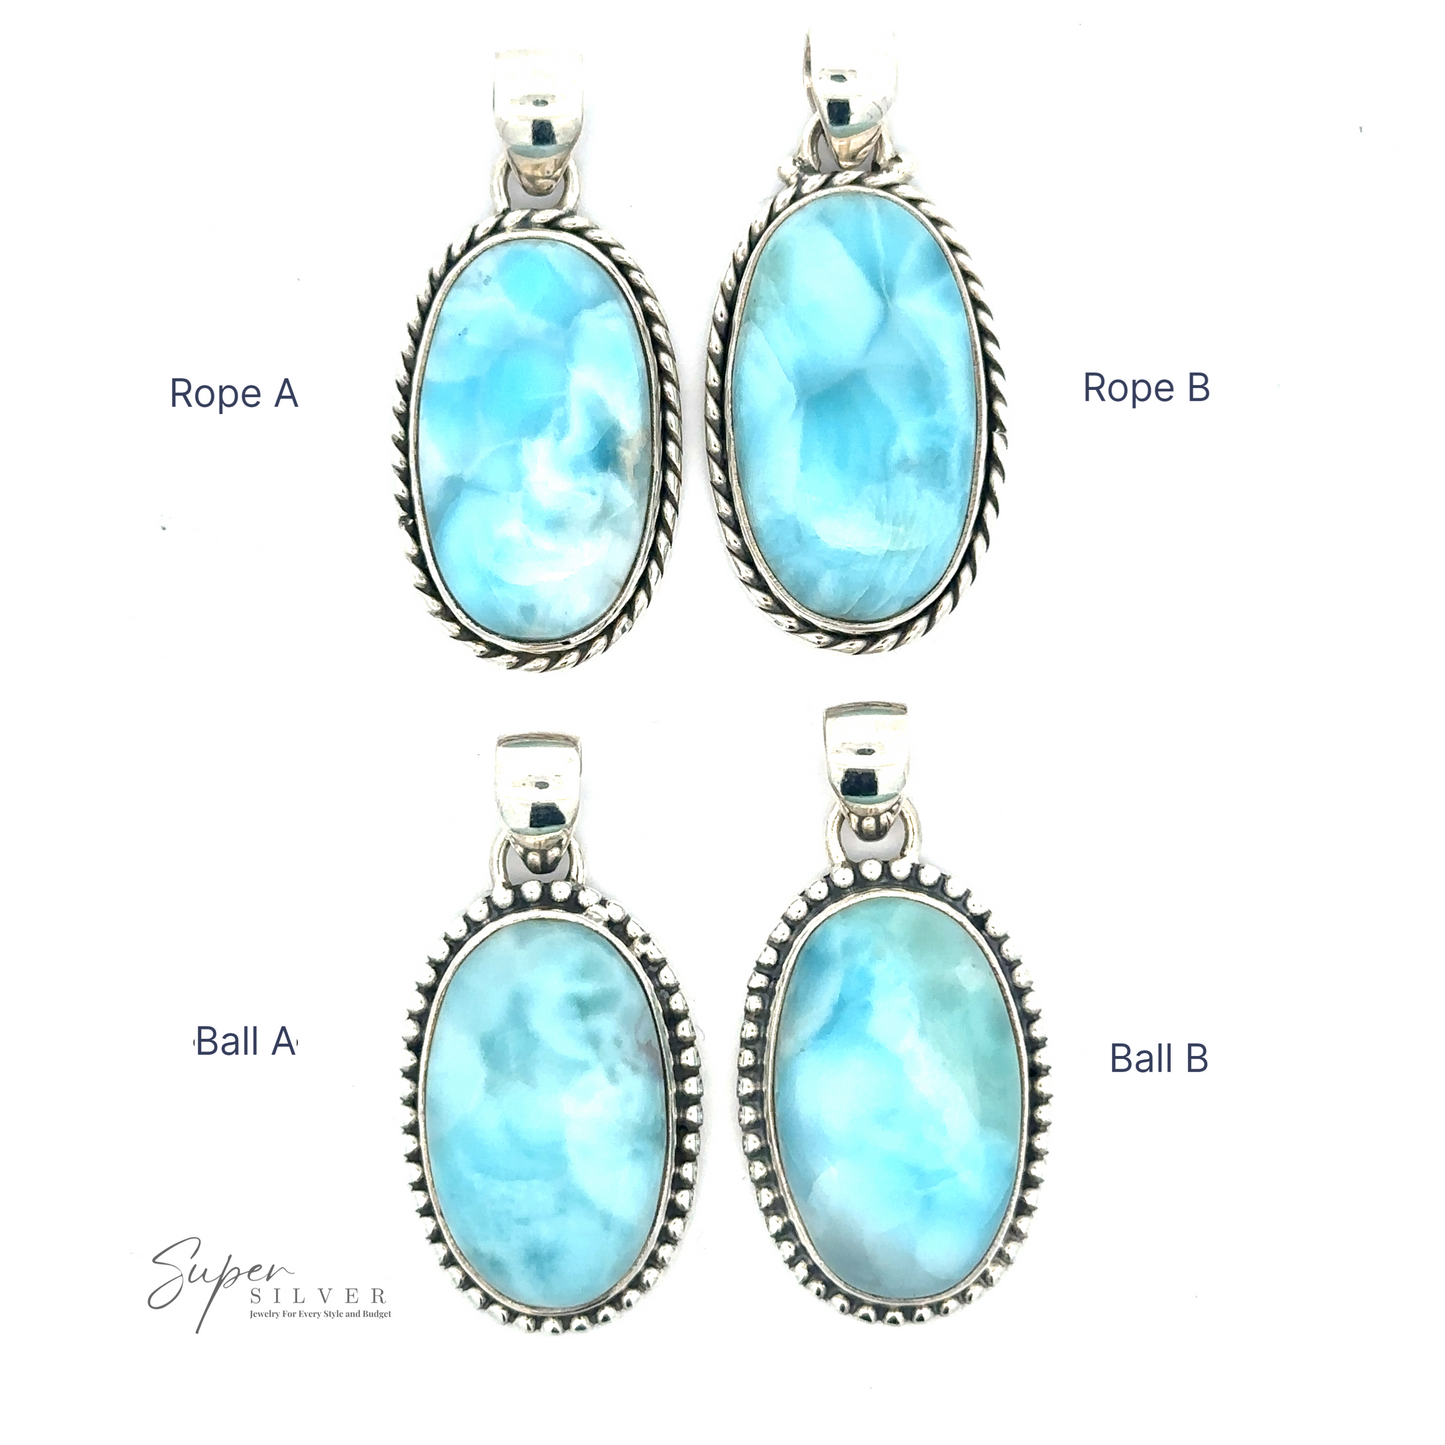 Four Larimar Oval Pendants with Ball or Rope Border are displayed, featuring unique metal edge designs: Rope A, Rope B, Ball A, and Ball B. Each pendant is meticulously crafted with sterling silver. The text "Super Silver" is in the bottom left corner.